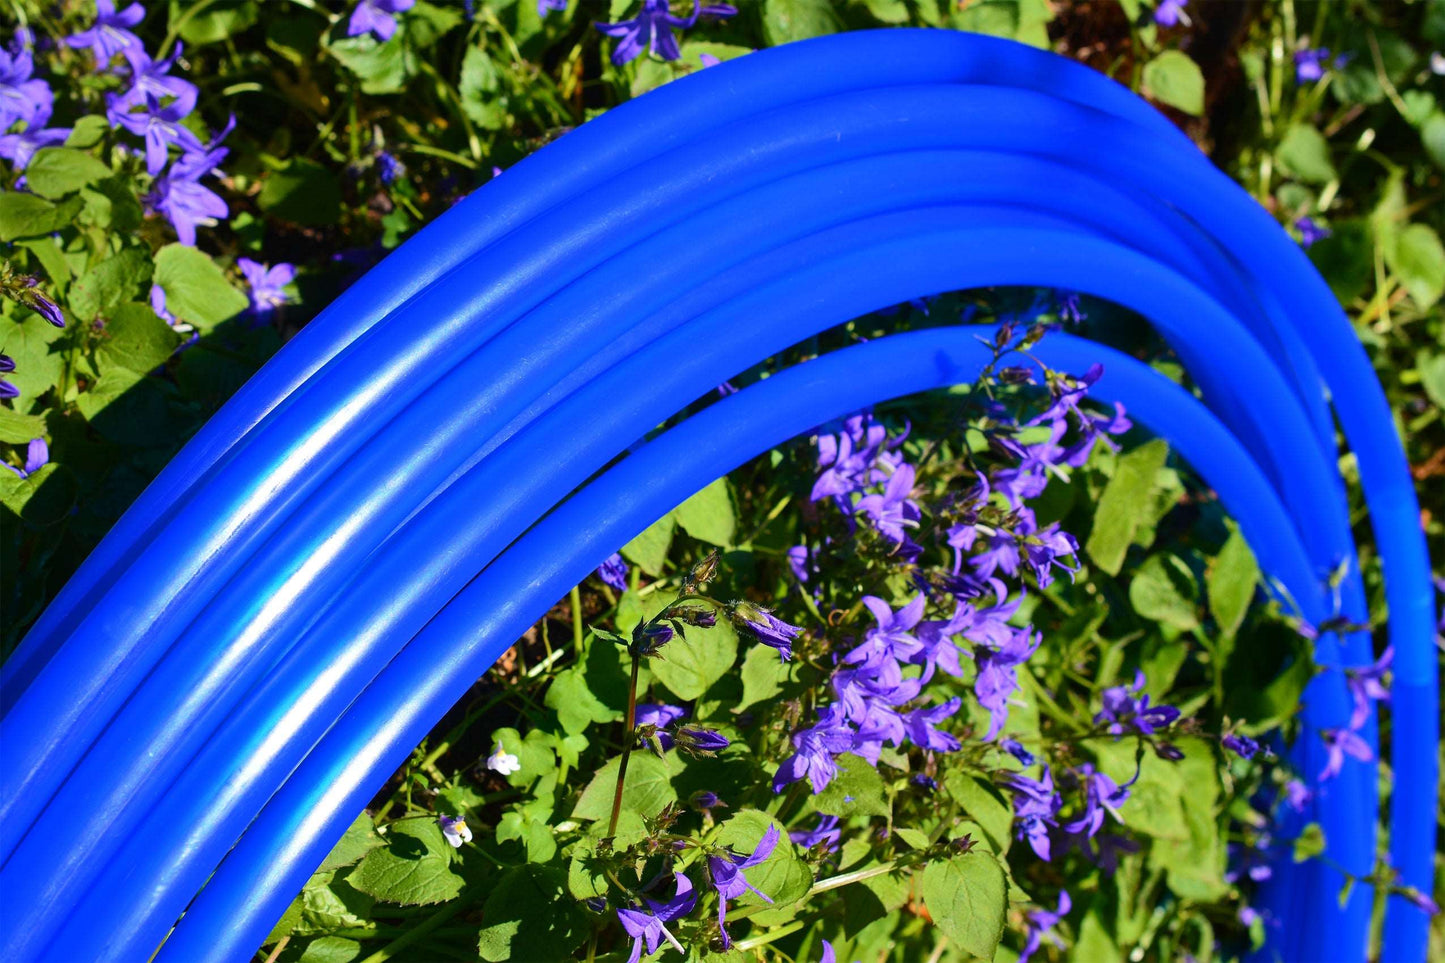 11/16 UV Blue Colored Polypro Hoops